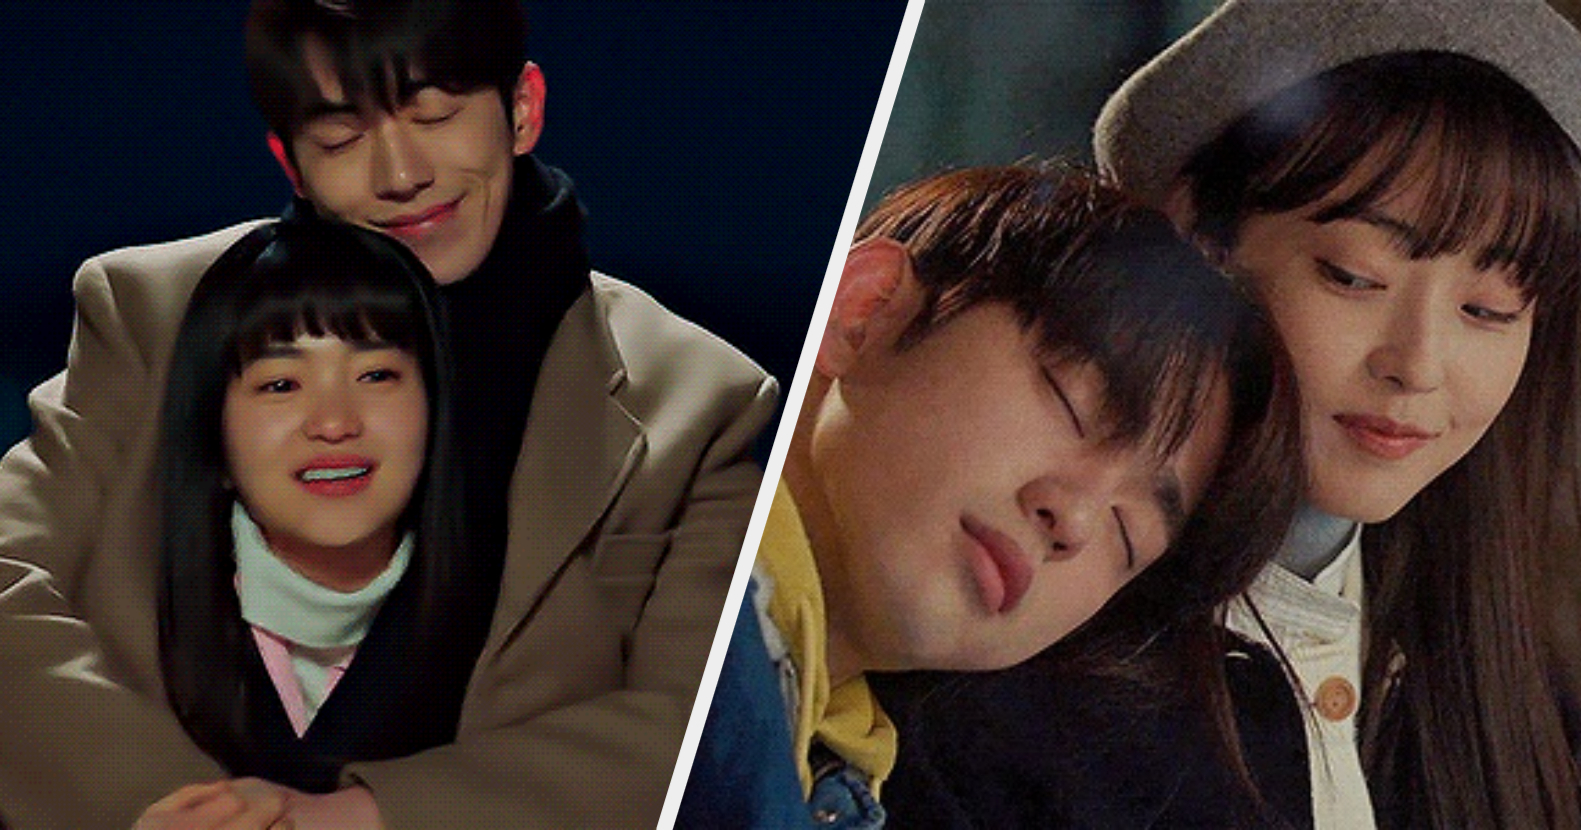 The 10 best Korean dramas of 2021 for HITC's Hall-of-Fame